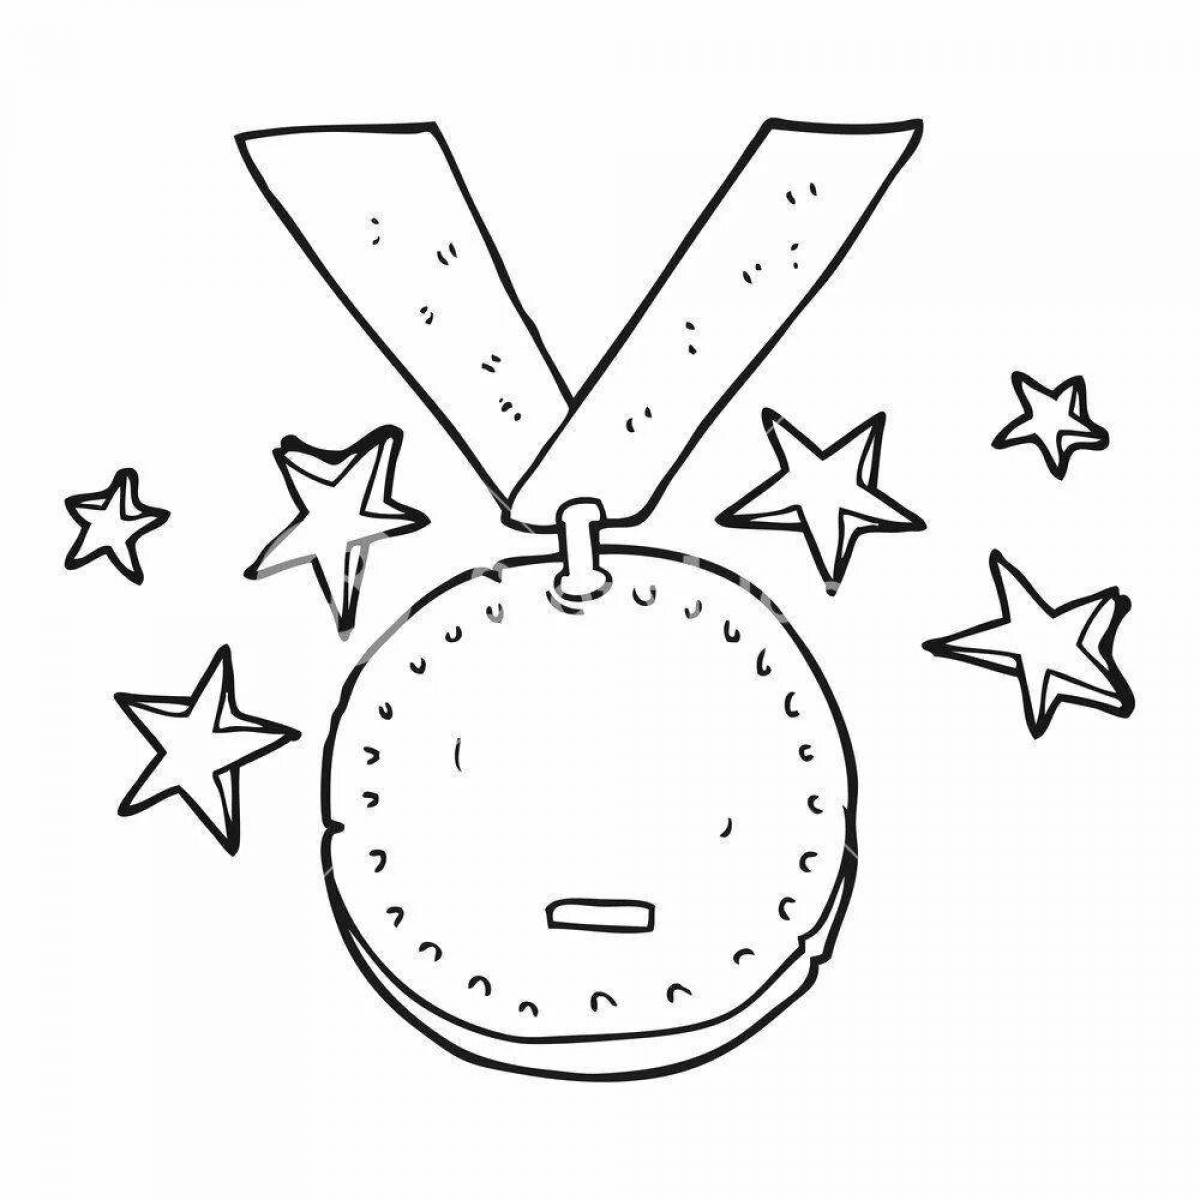 Awesome 1st place medal coloring page